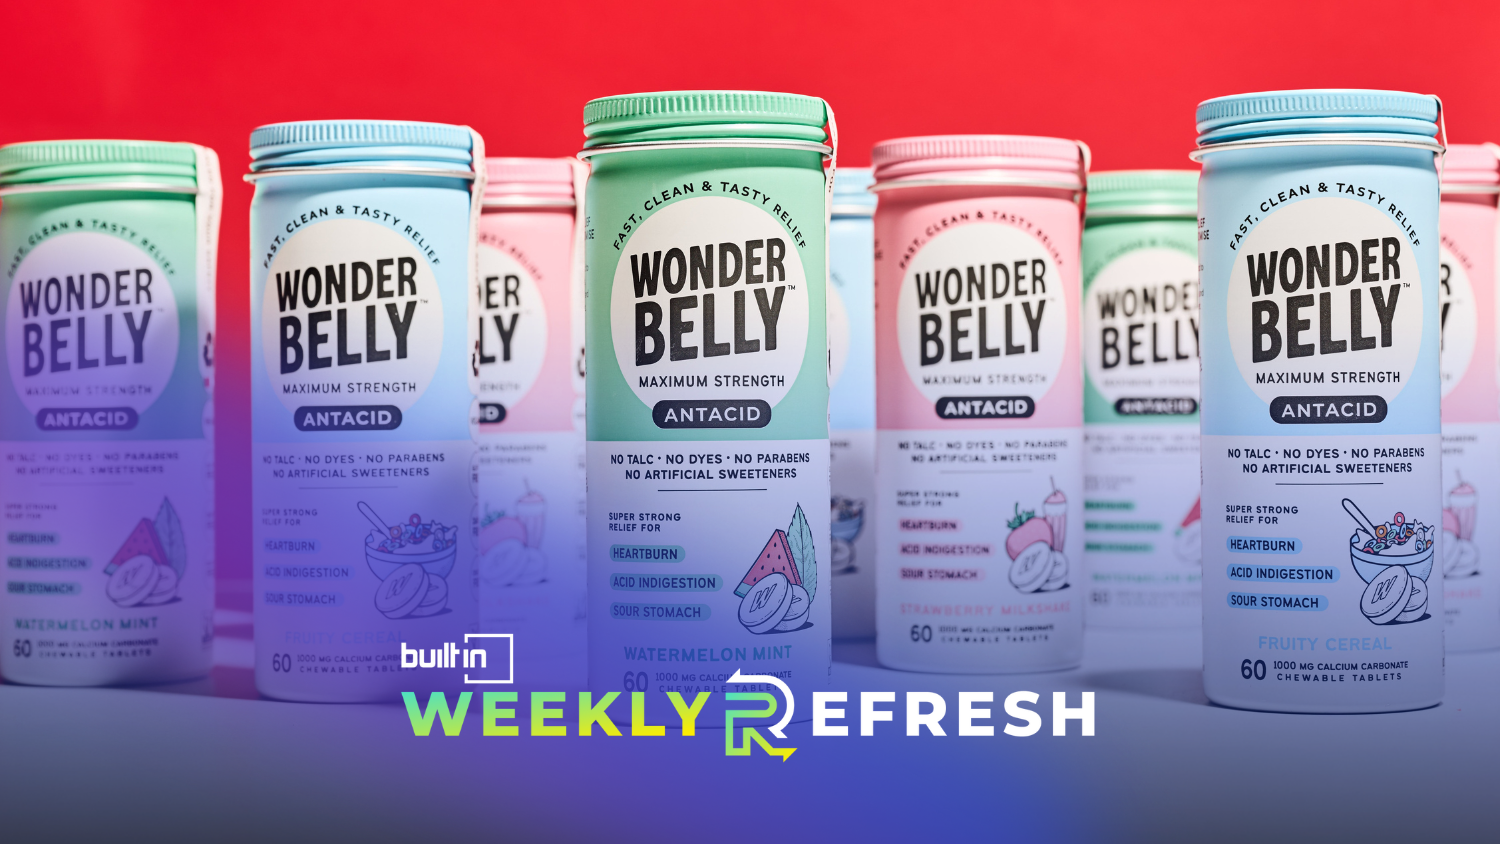 Wonderbelly products against a red background